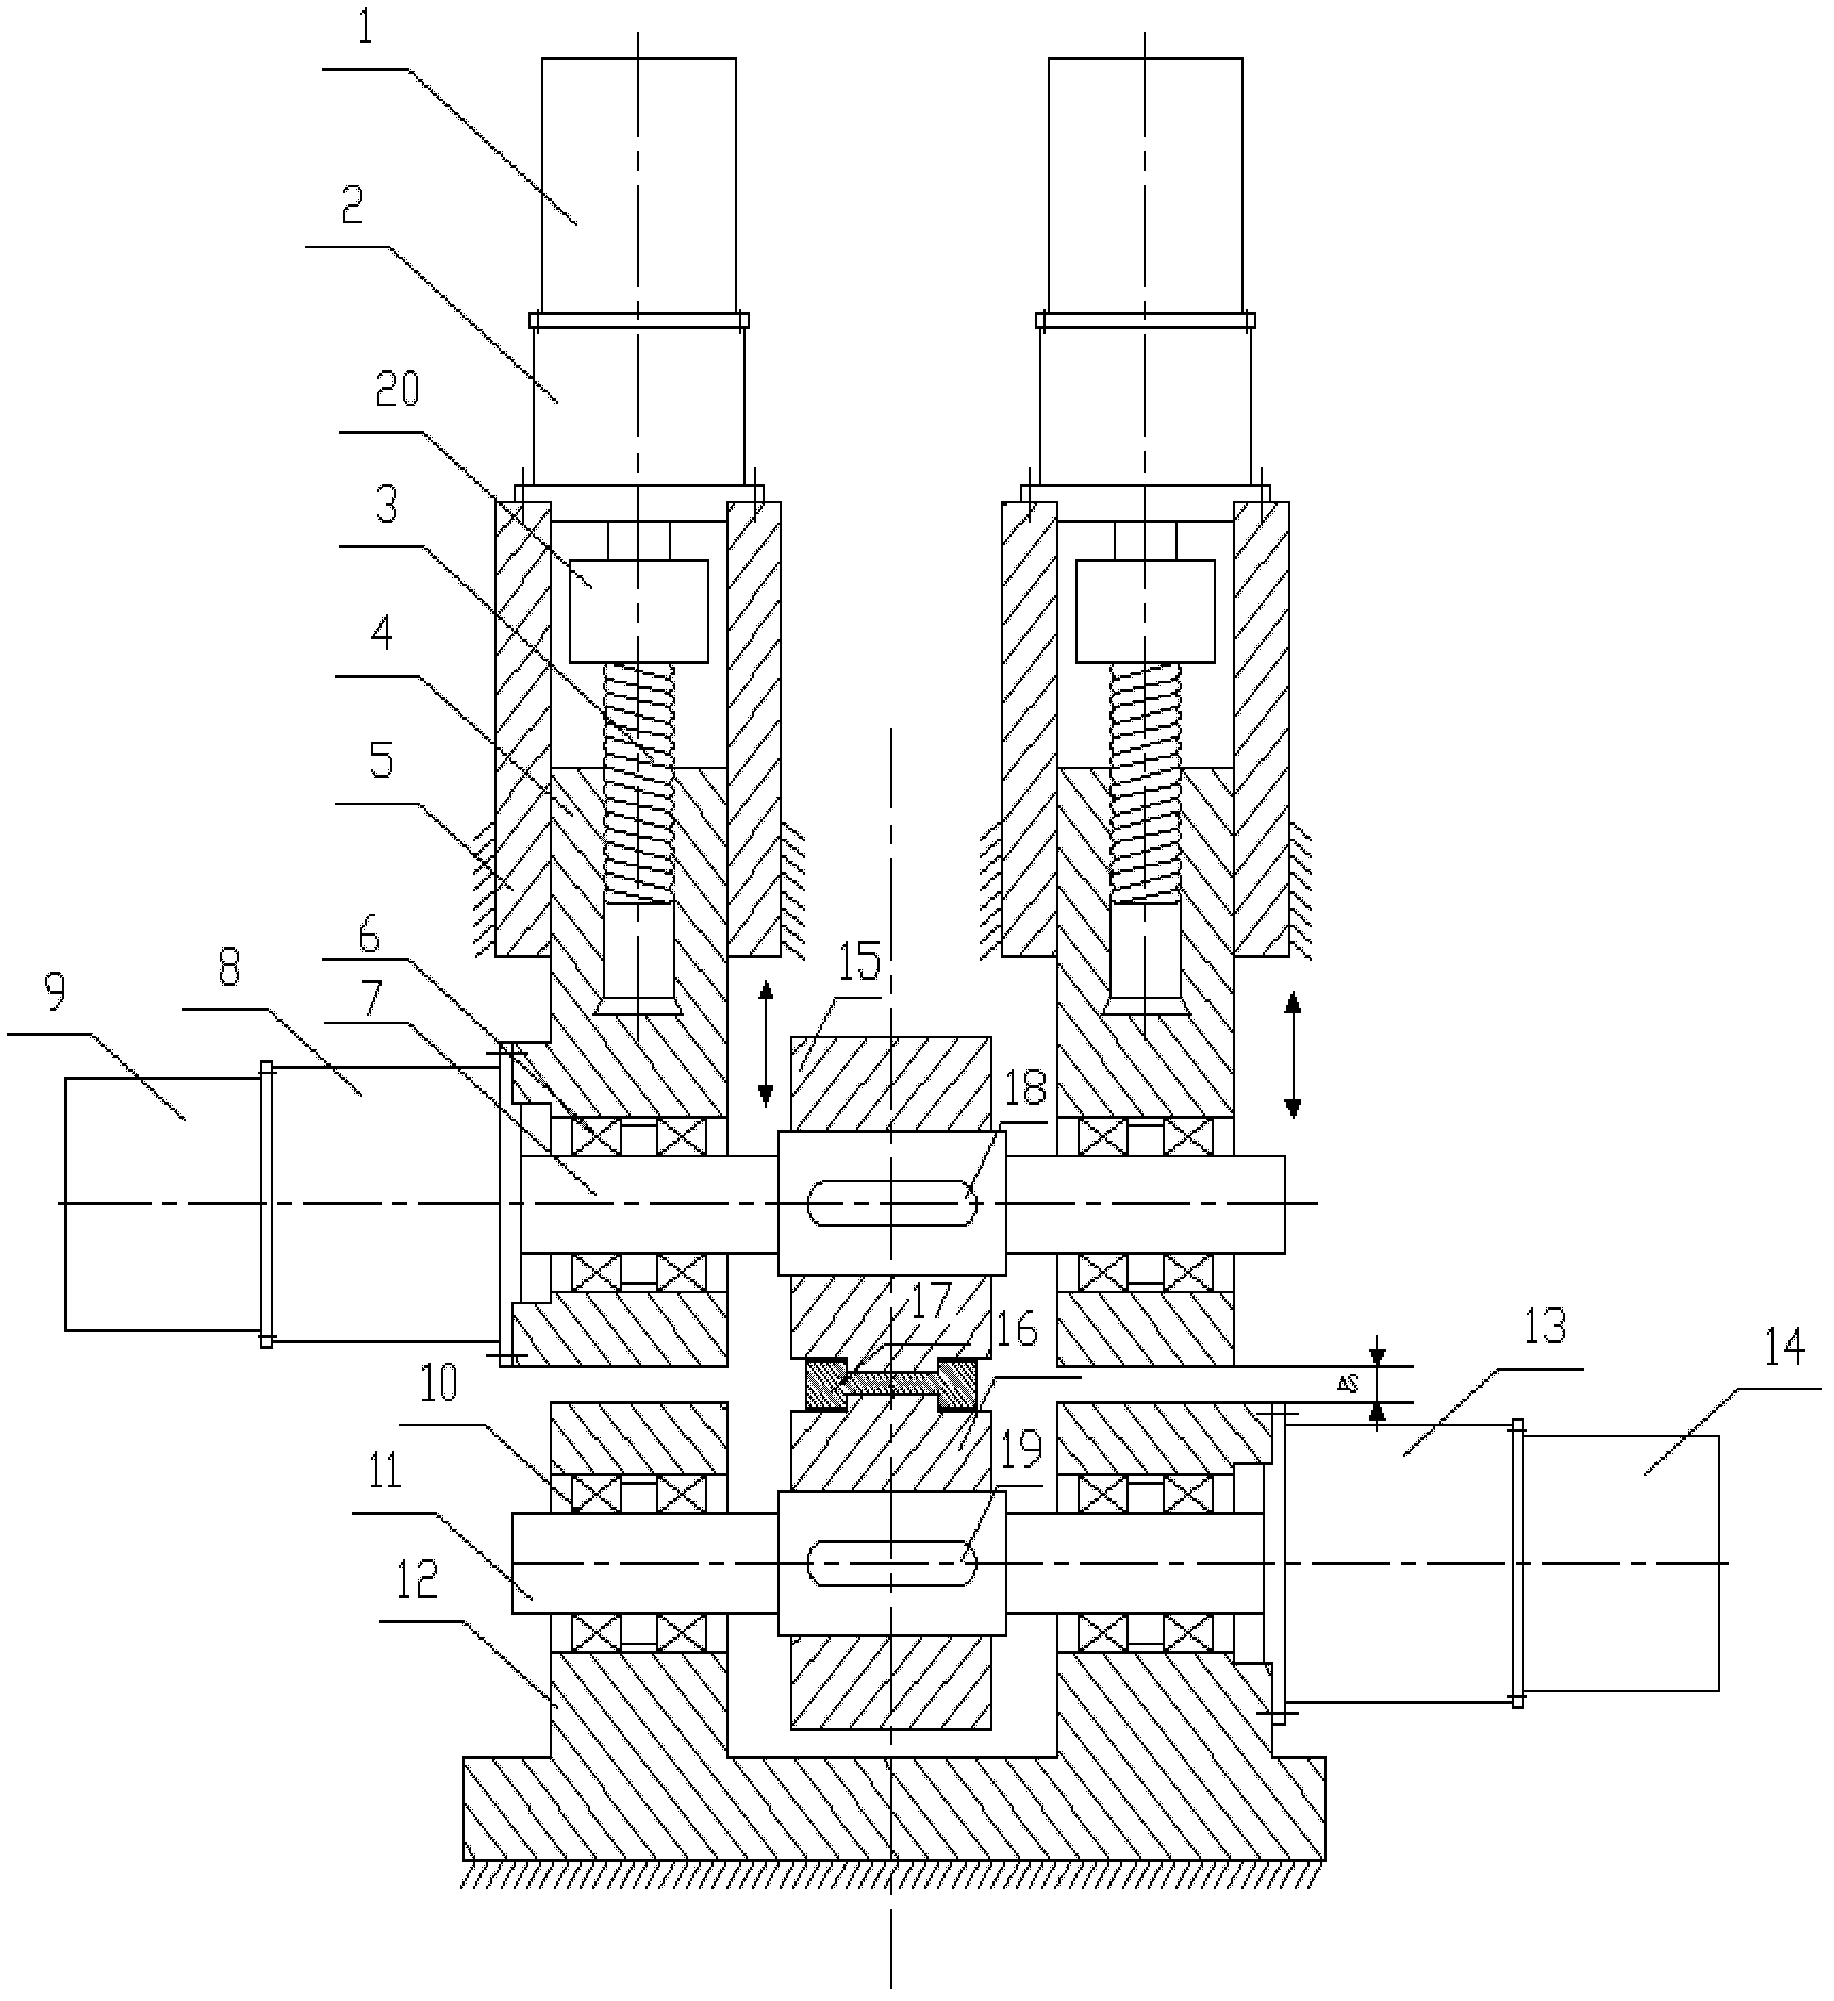 Alternating-current direct-drive servo device for main transmission and two-roller radial spacing adjustment